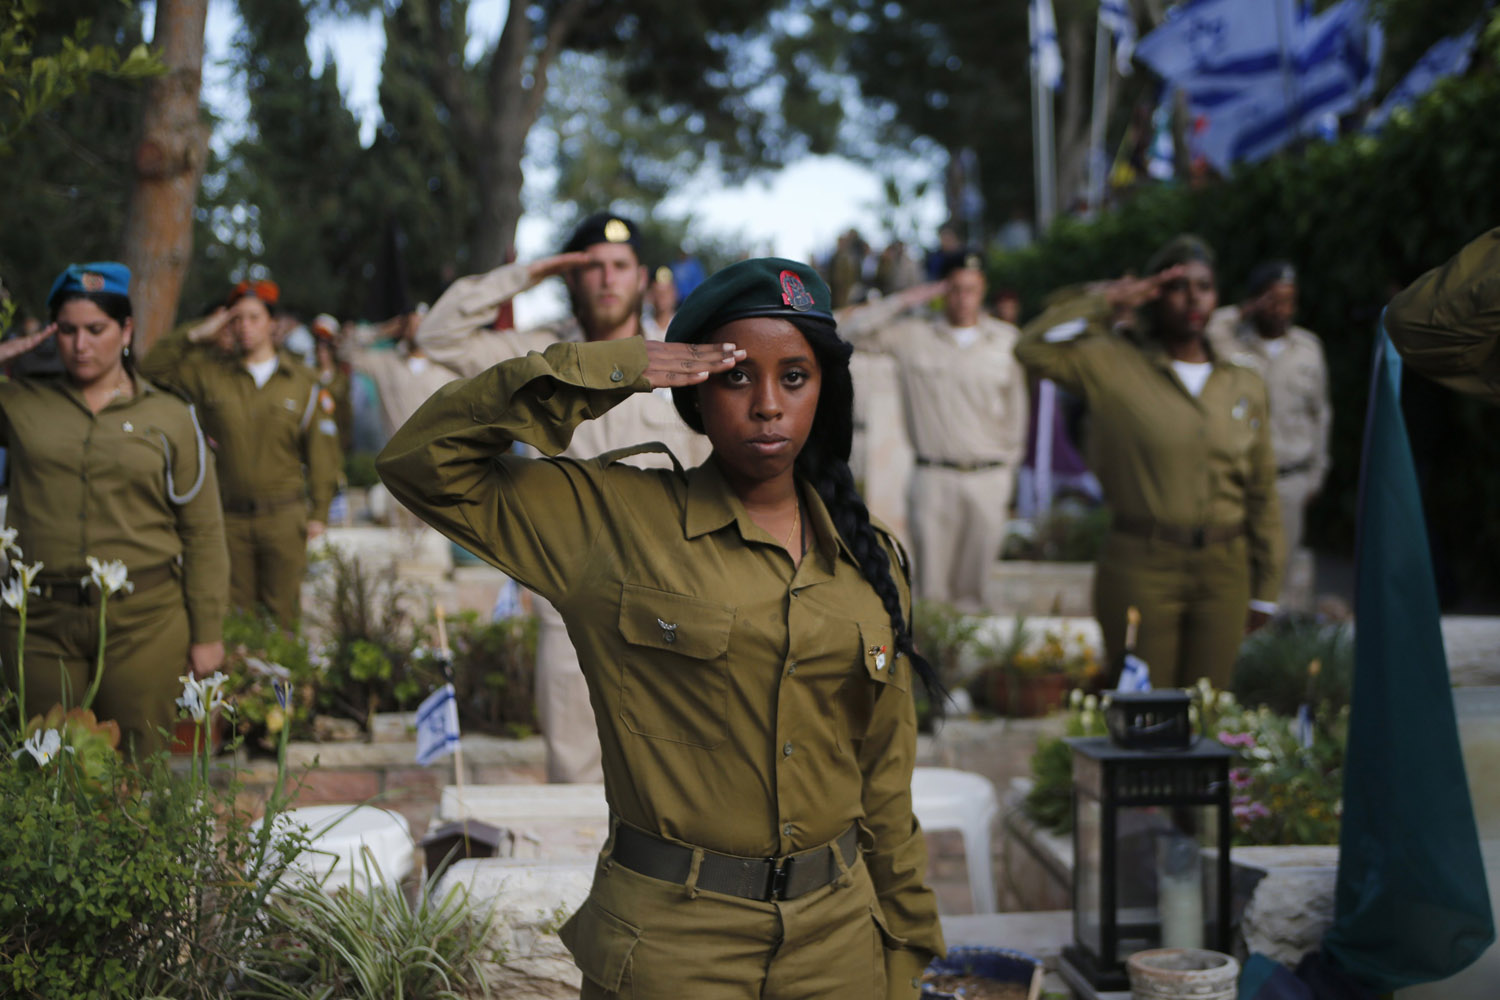 Israeli soldiers salute after placing flags on the graves of fallen soldiers at Mount Herzl military cemetery in Jerusalem